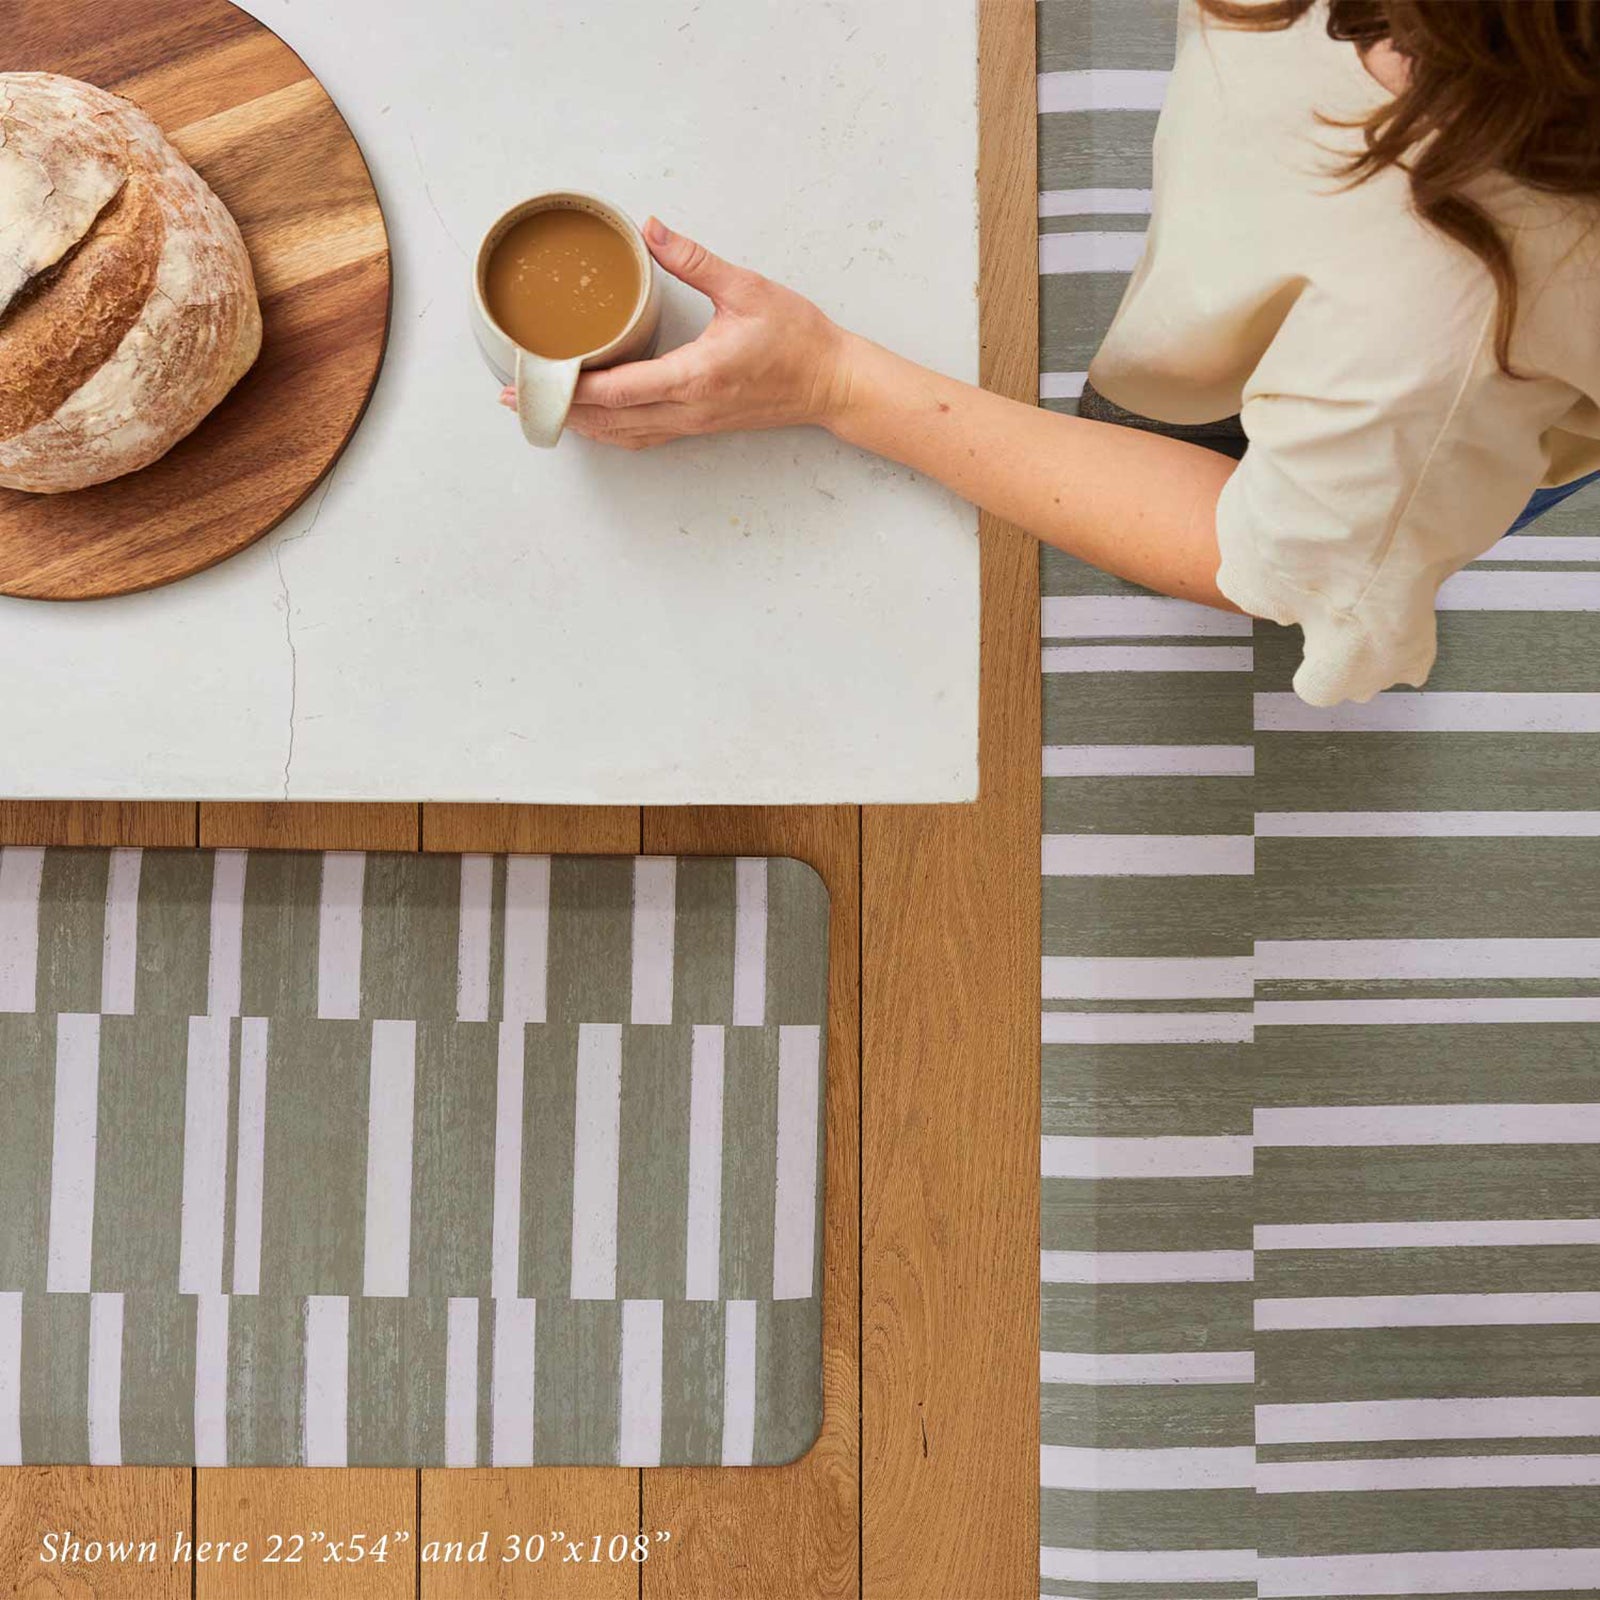 sutton stripe basil green and white inverted stripe standing mat shown from in sizes 22x54 and 30x108 with woman standing on the mat at kitchen counter holding a cup of coffee next to a loaf of bread